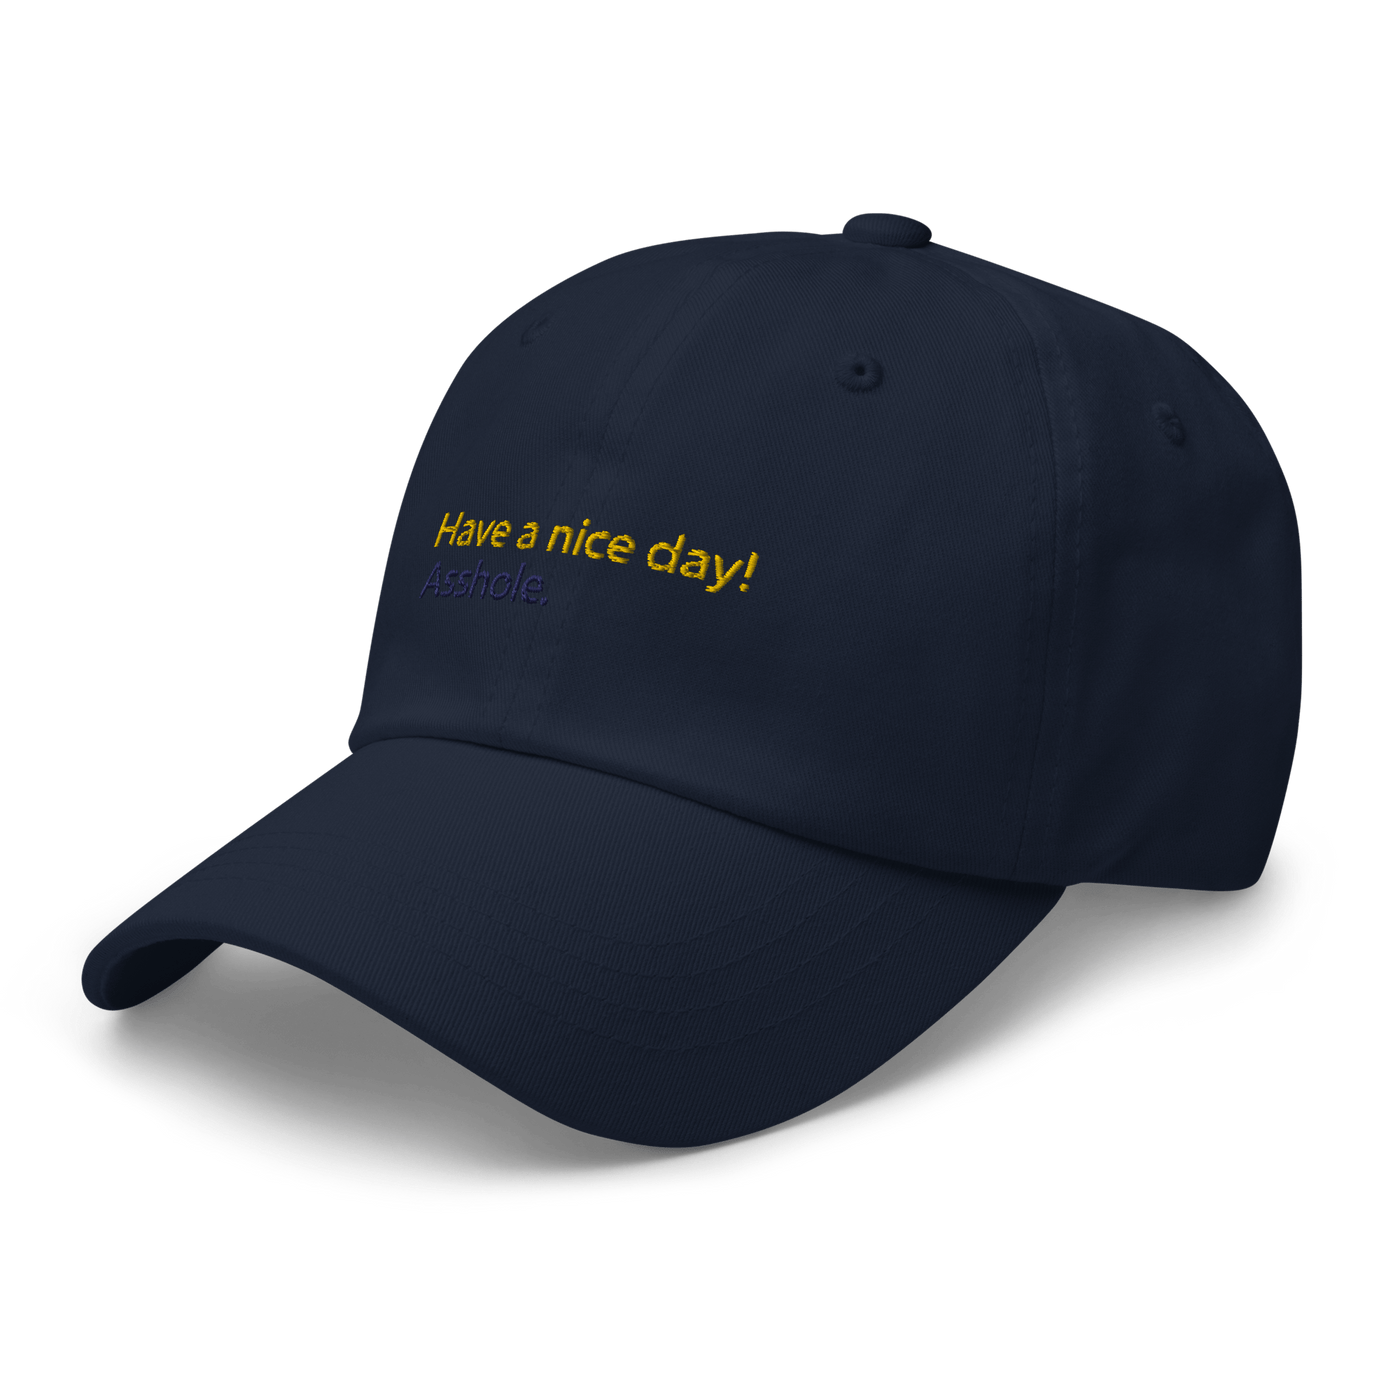 Have a nice day! (asshole) Dad hat - Navy - - Just Another Cap Store